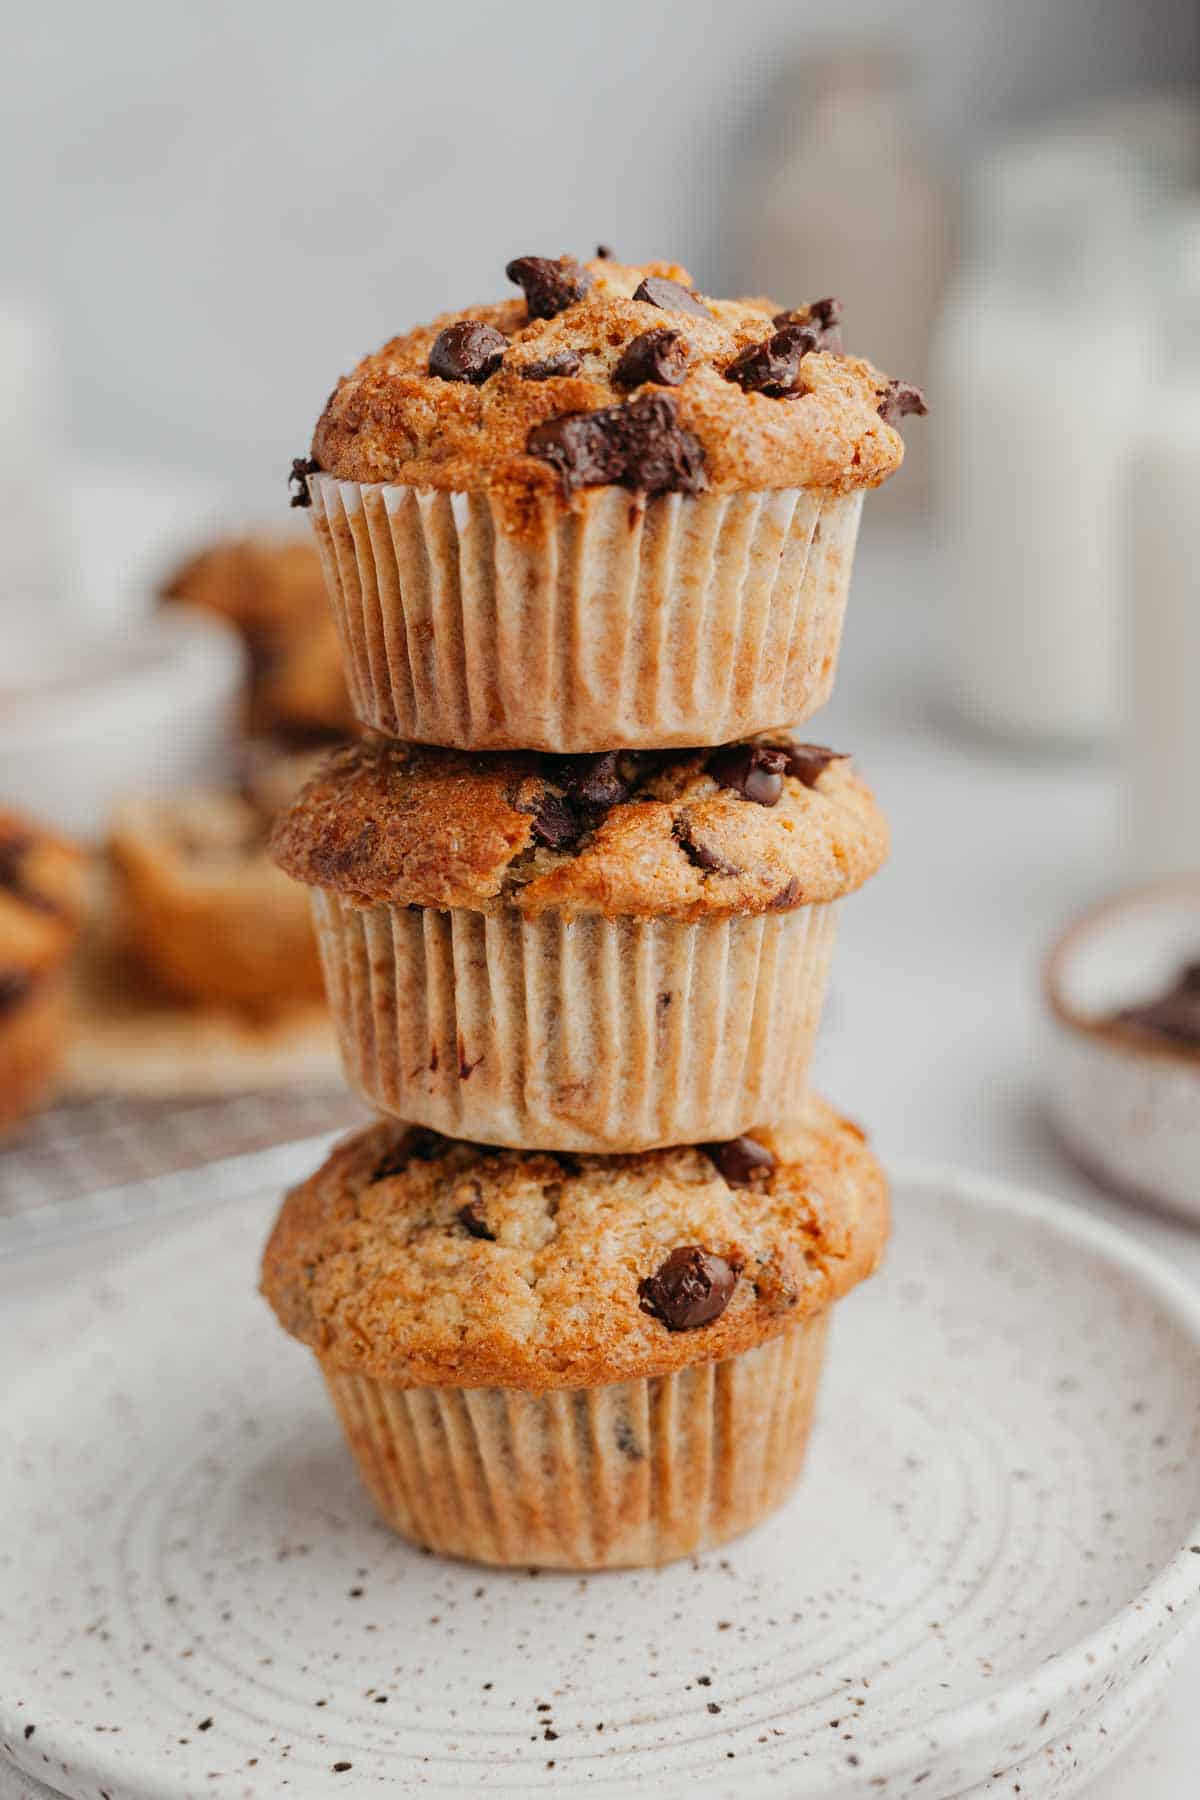 Three chocolate chip muffins stacked on top of each other.